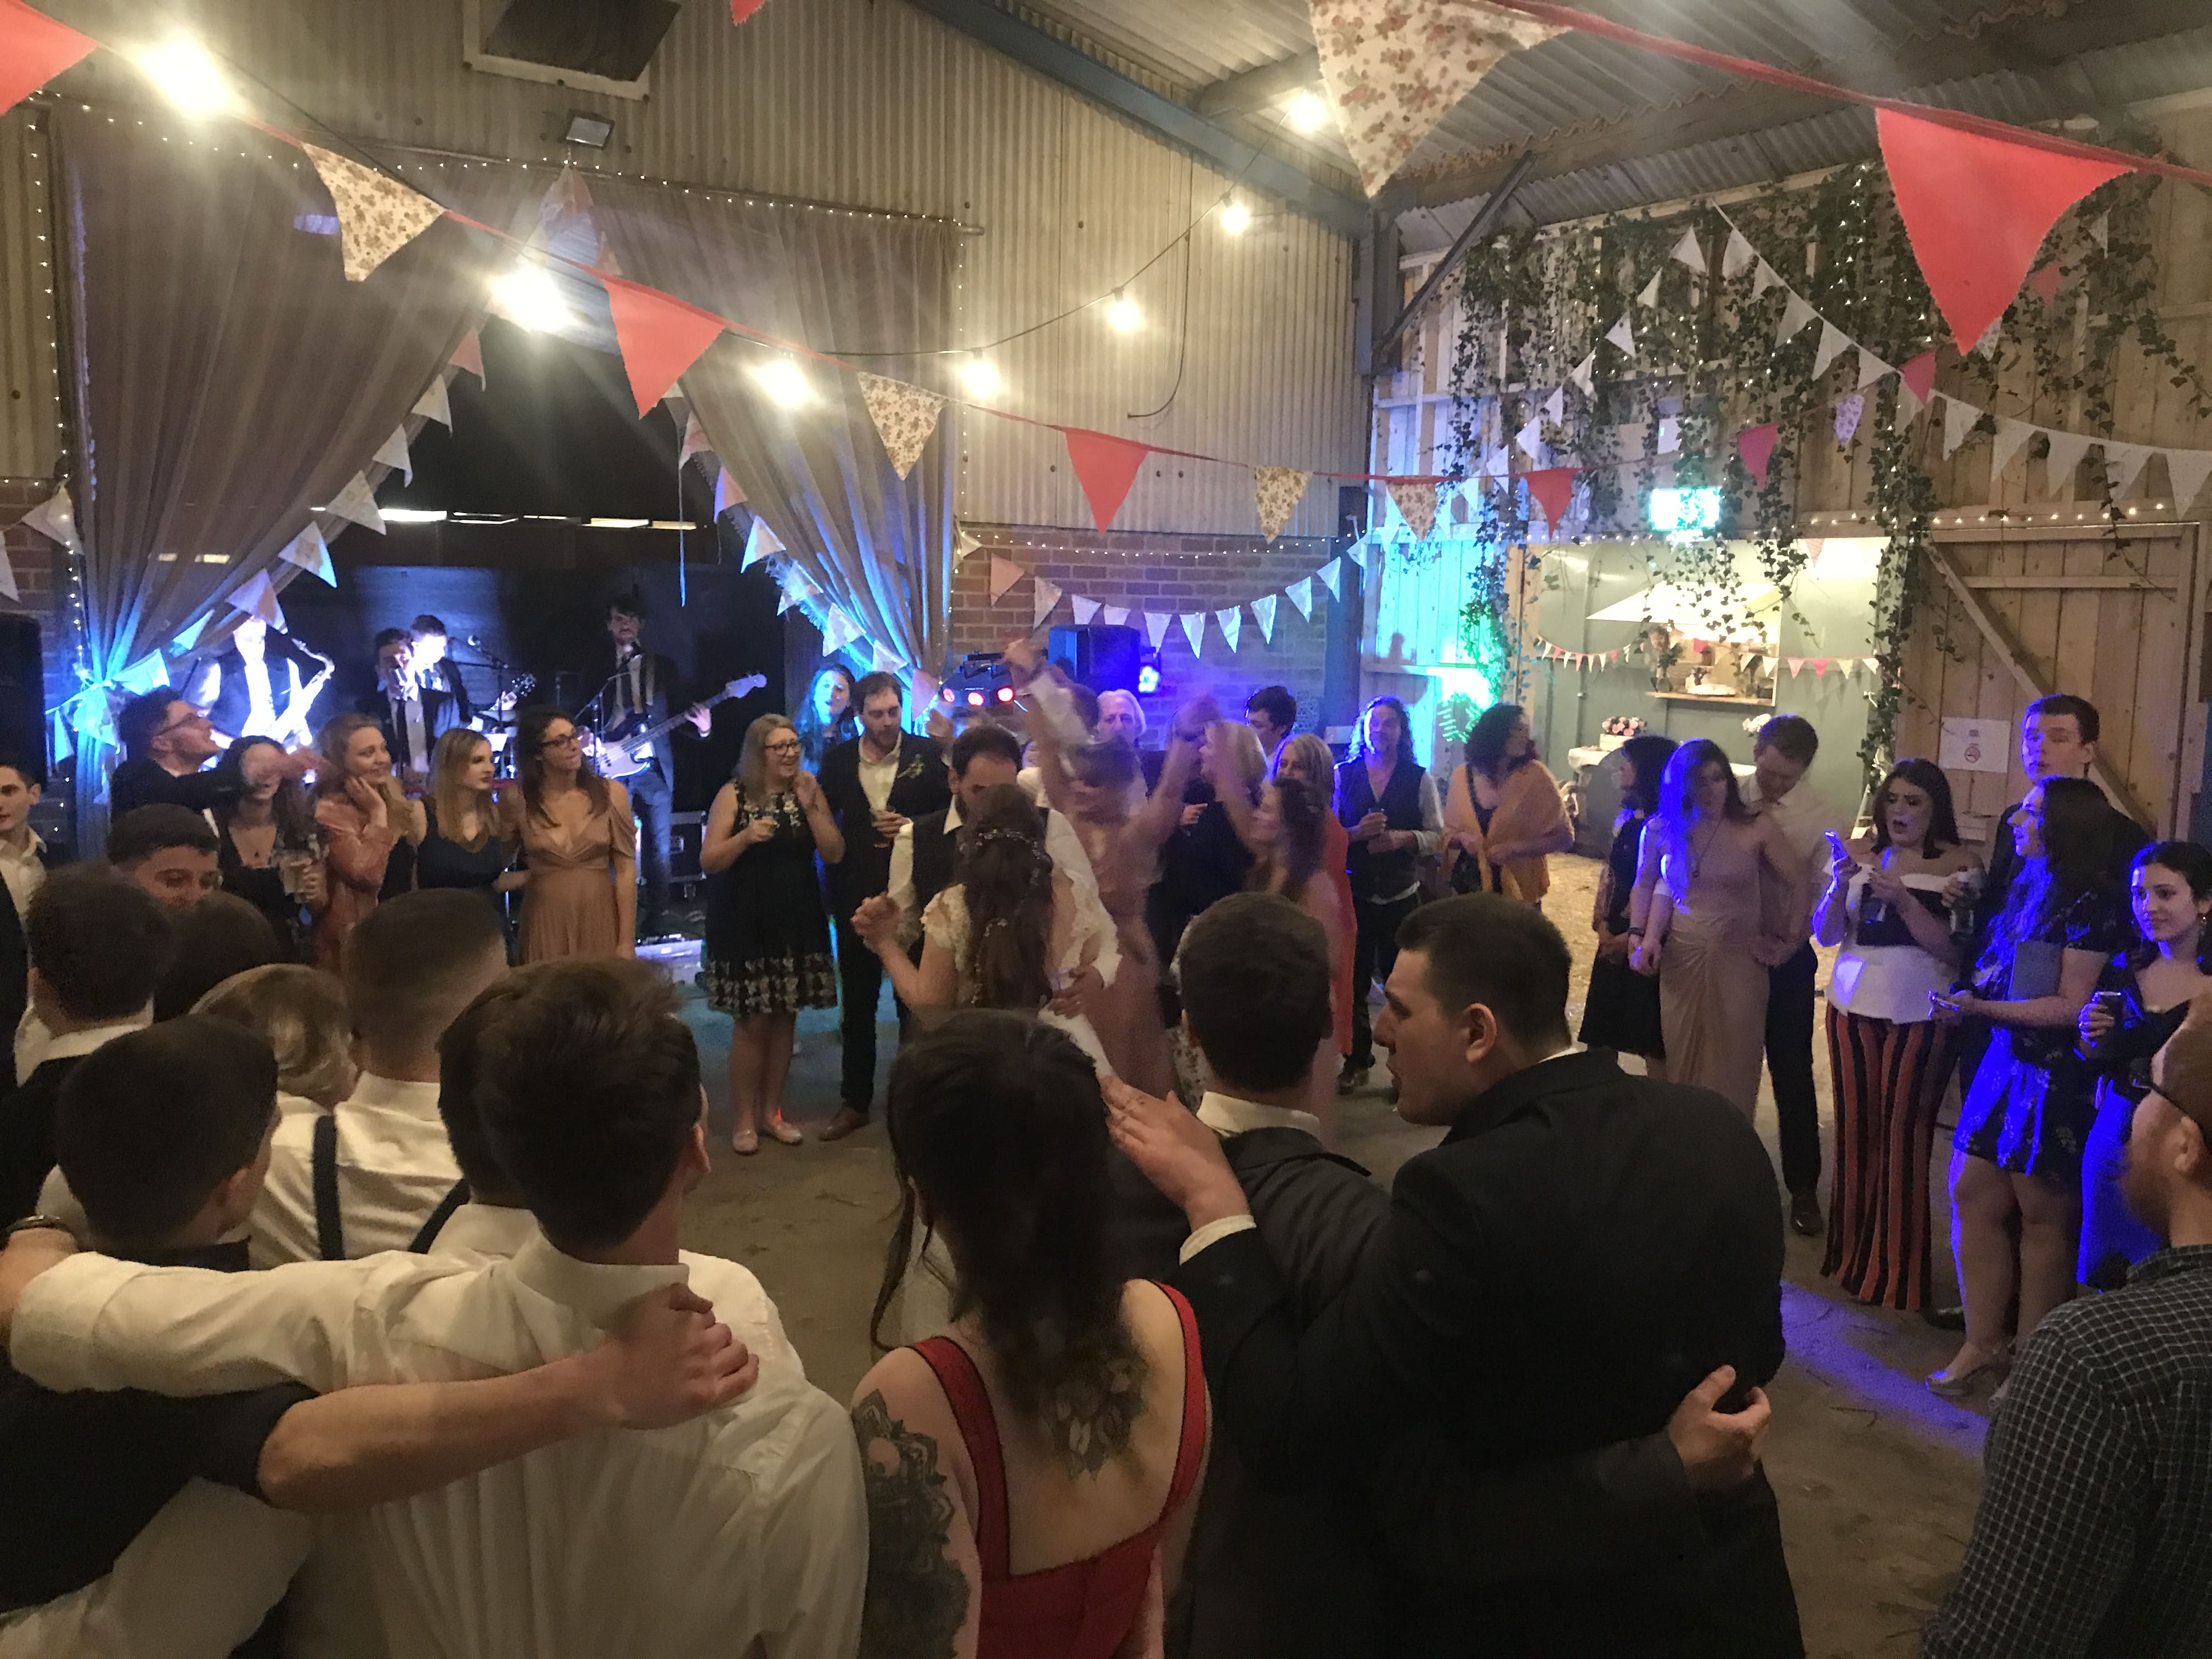 Wandering Wings Perform First Dance